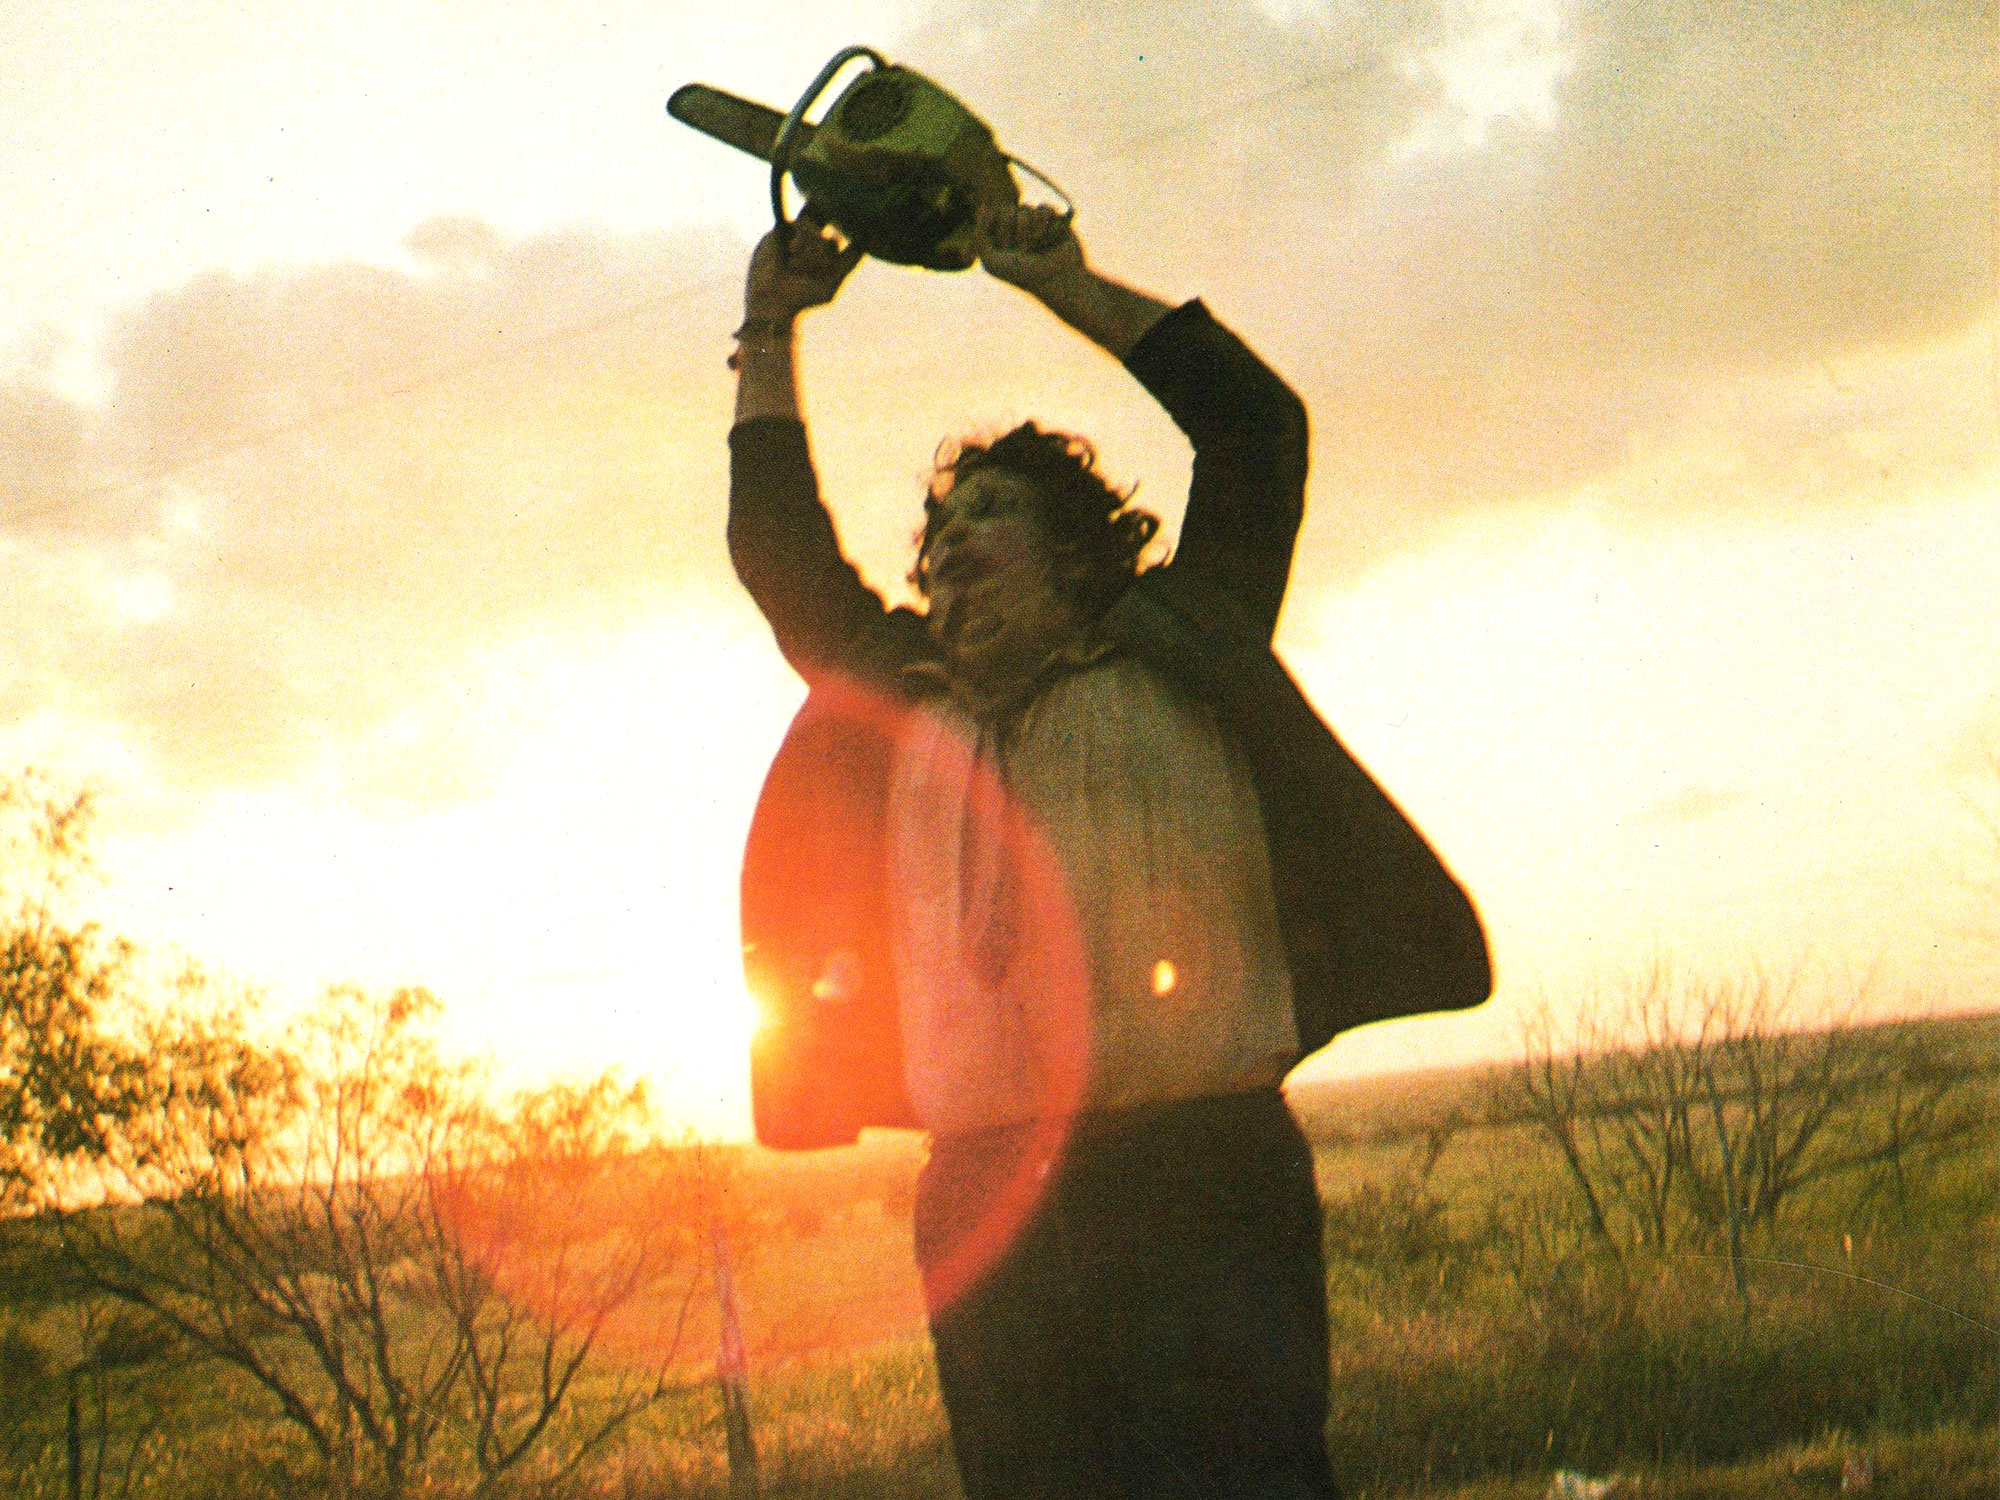 The Texas Chainsaw Massacre and the sound of violence 